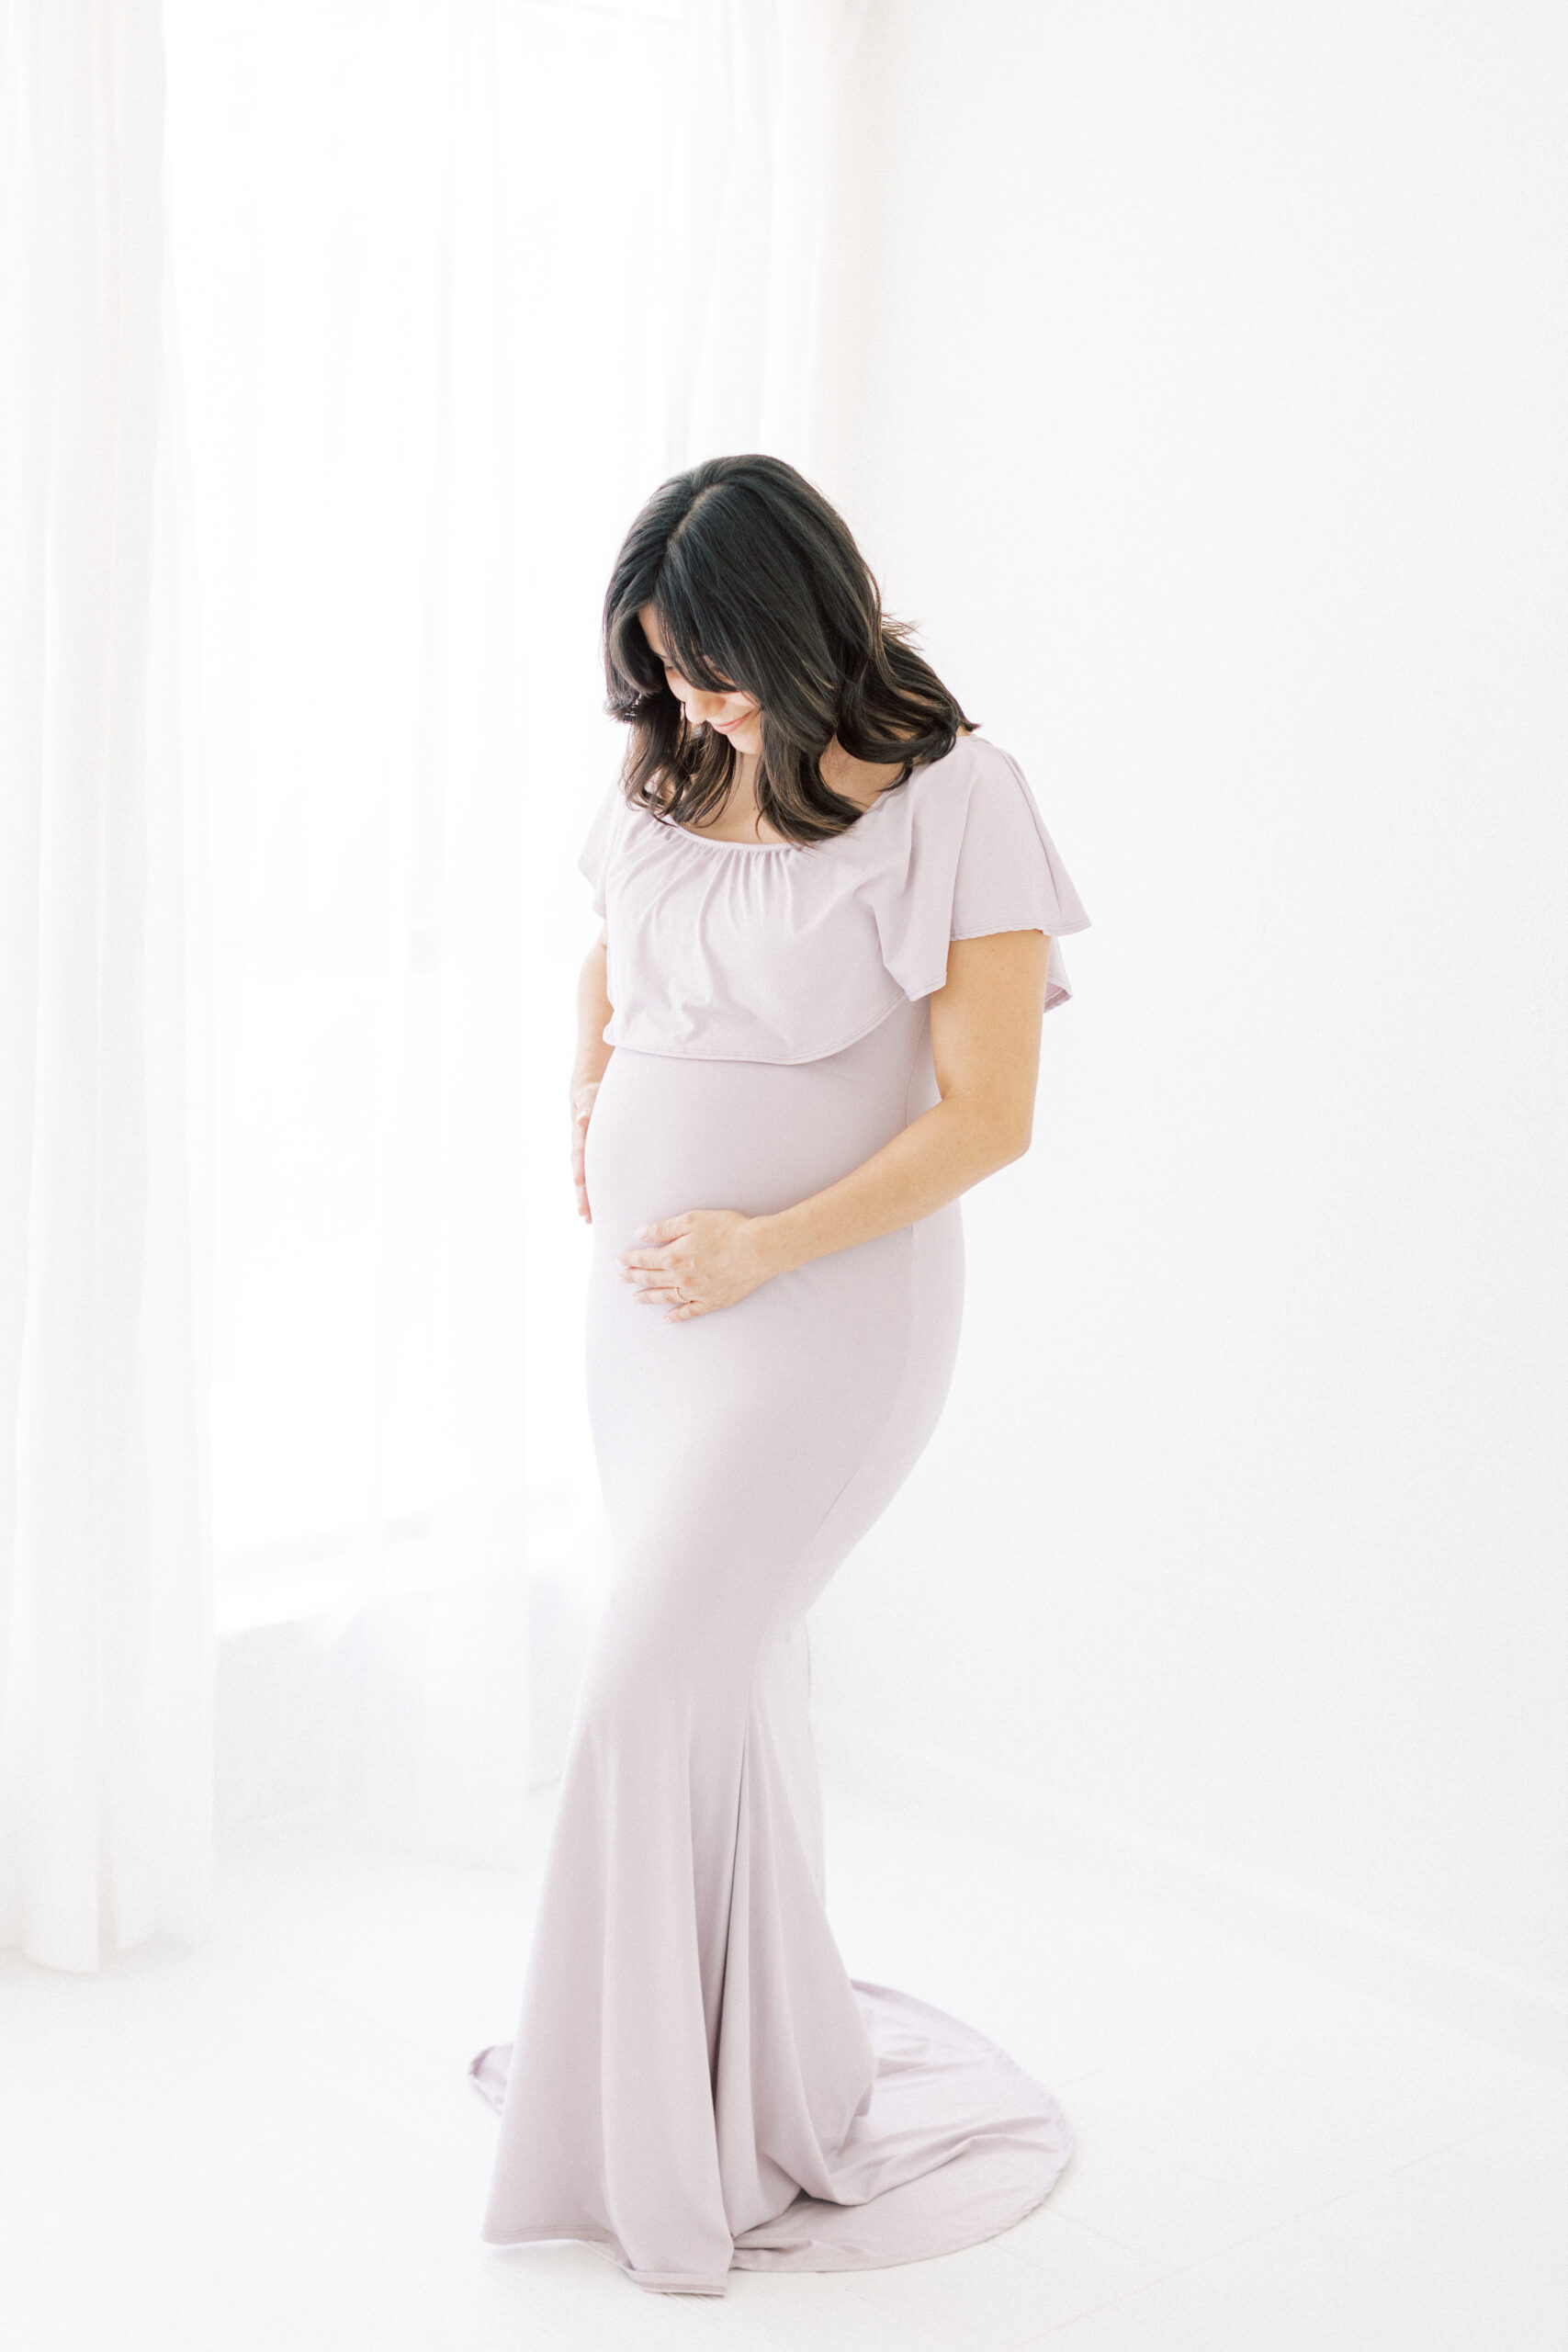 A mom to be stands in a purple dress looking down at her bump in a studio by a window